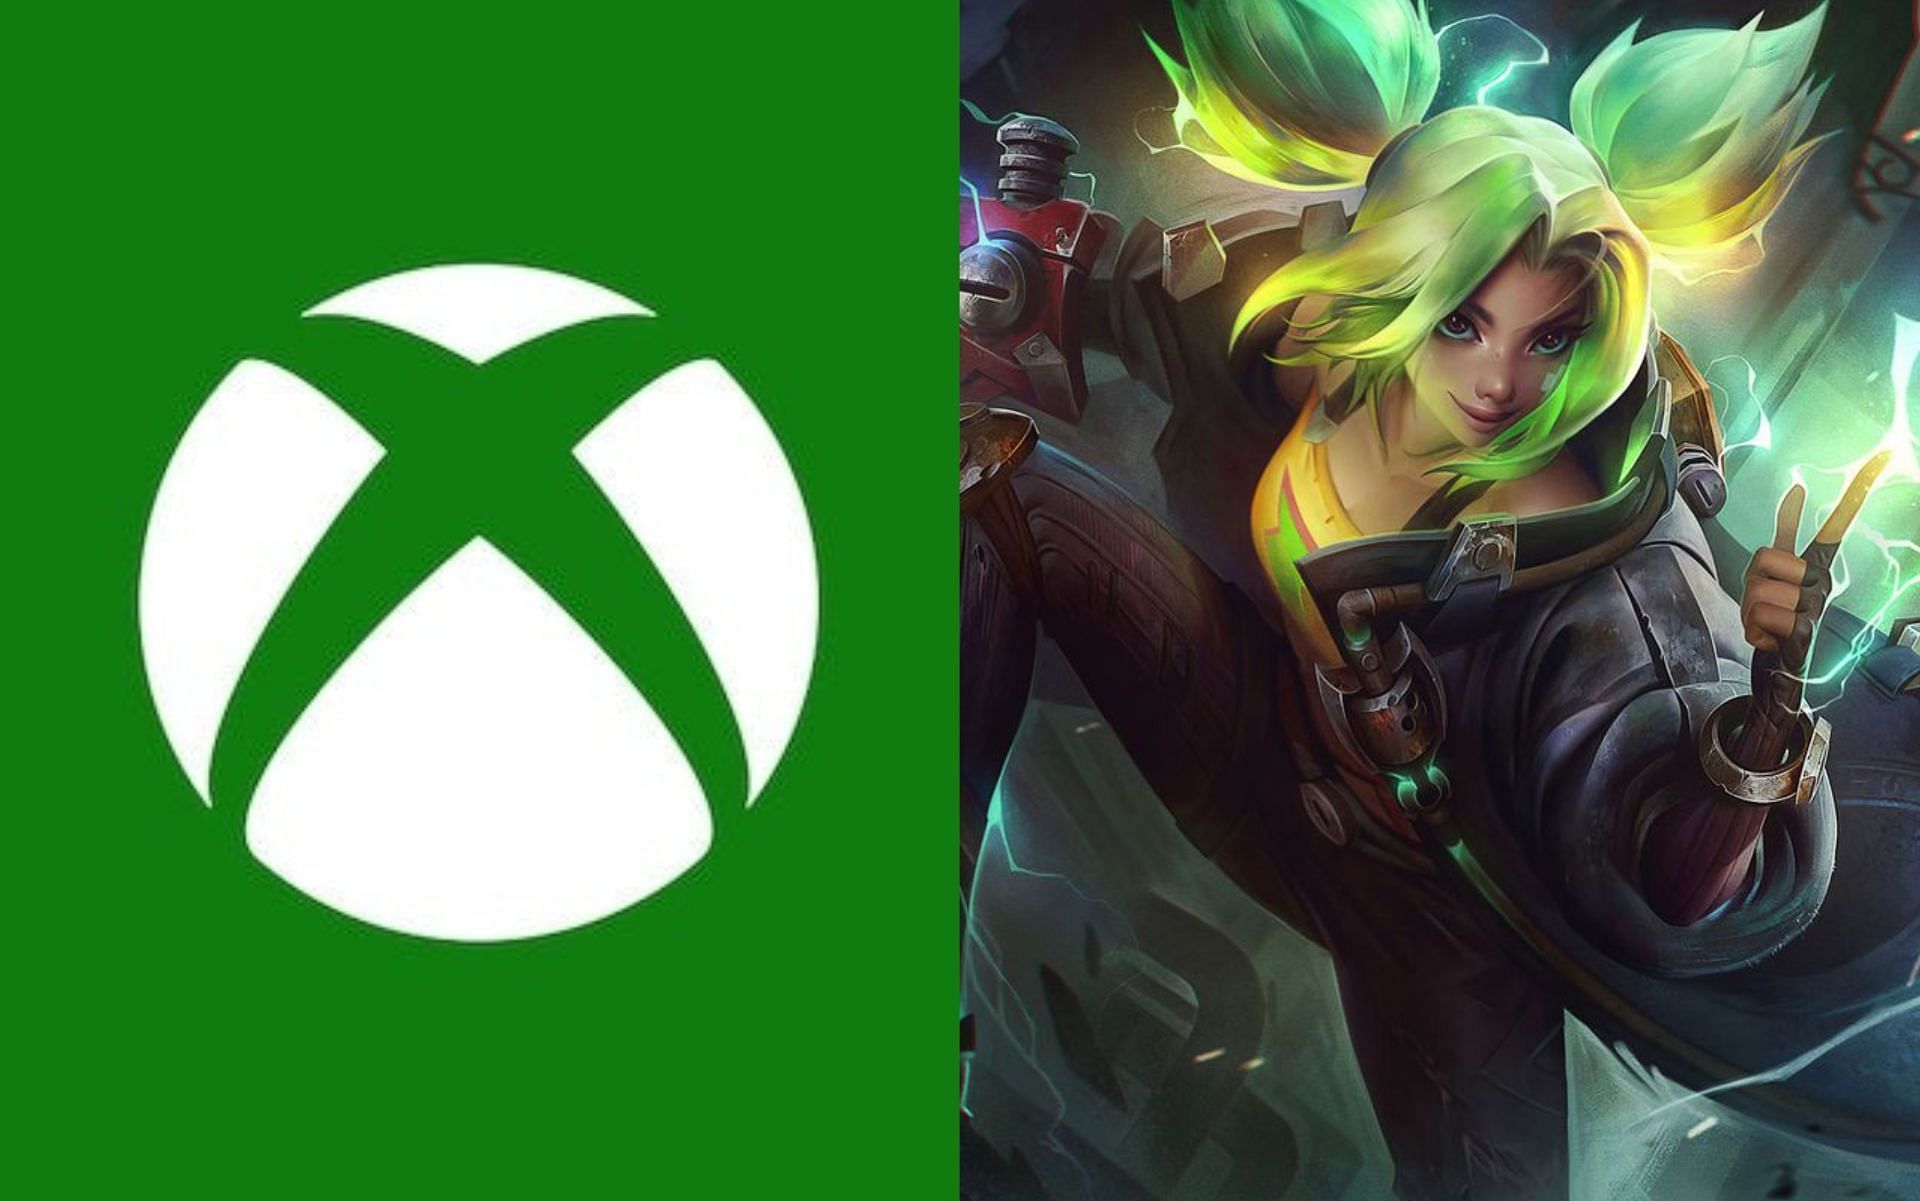 Riot Games available with Xbox Game Pass - Xbox & Bethesda Games